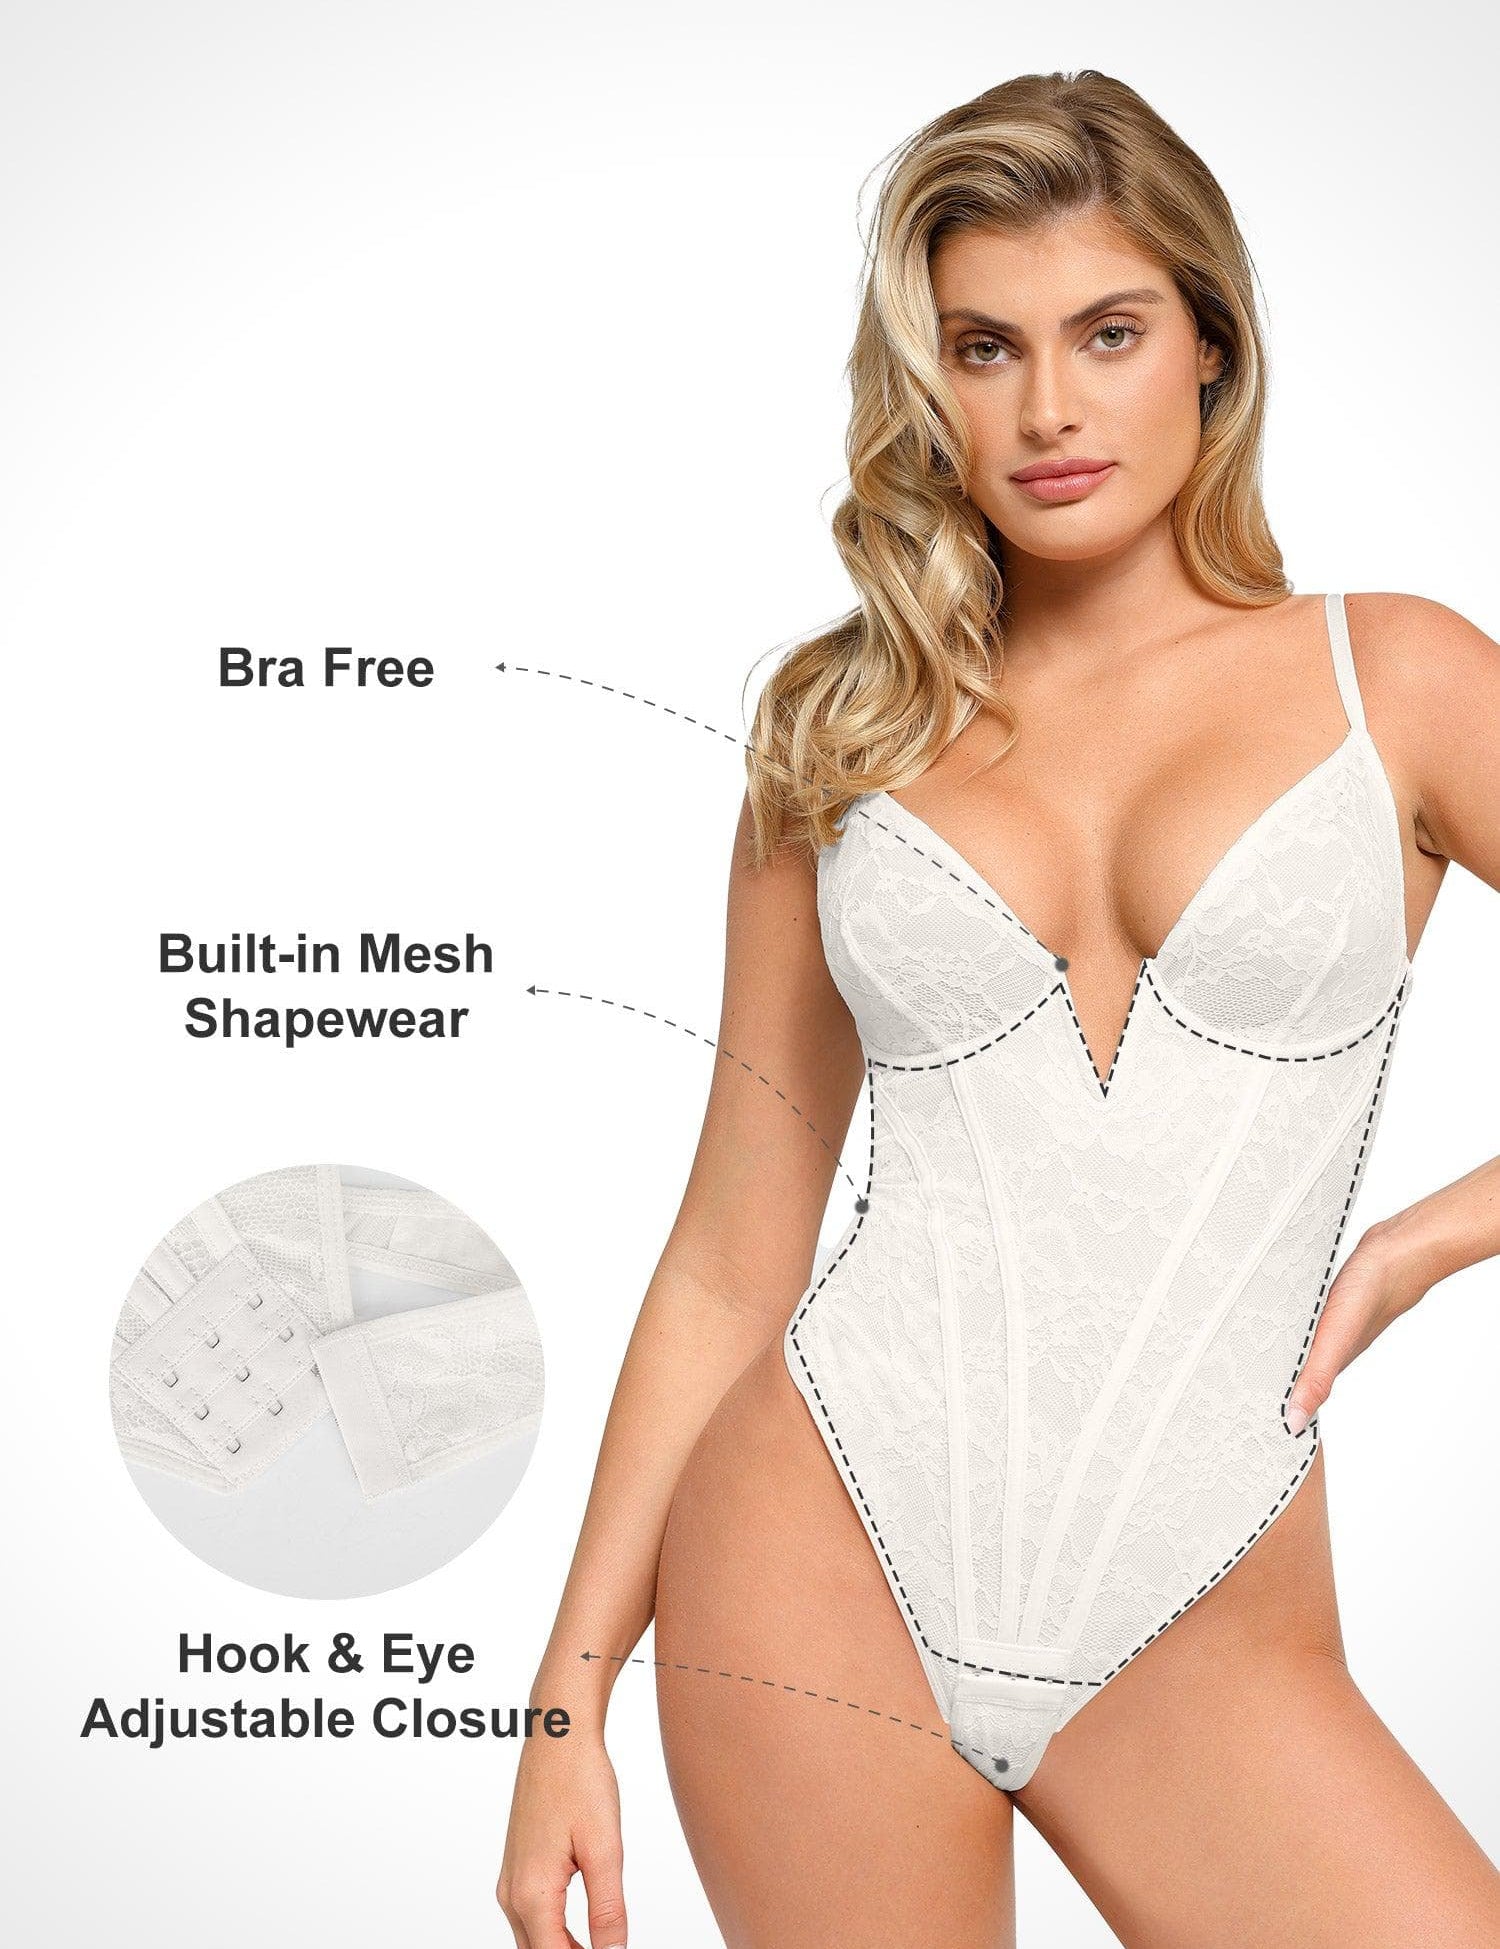 Popilush® Tops Body Shaper Jumpsuit The Shapewear Bodysuits Lace Smooth Firm Control Thong